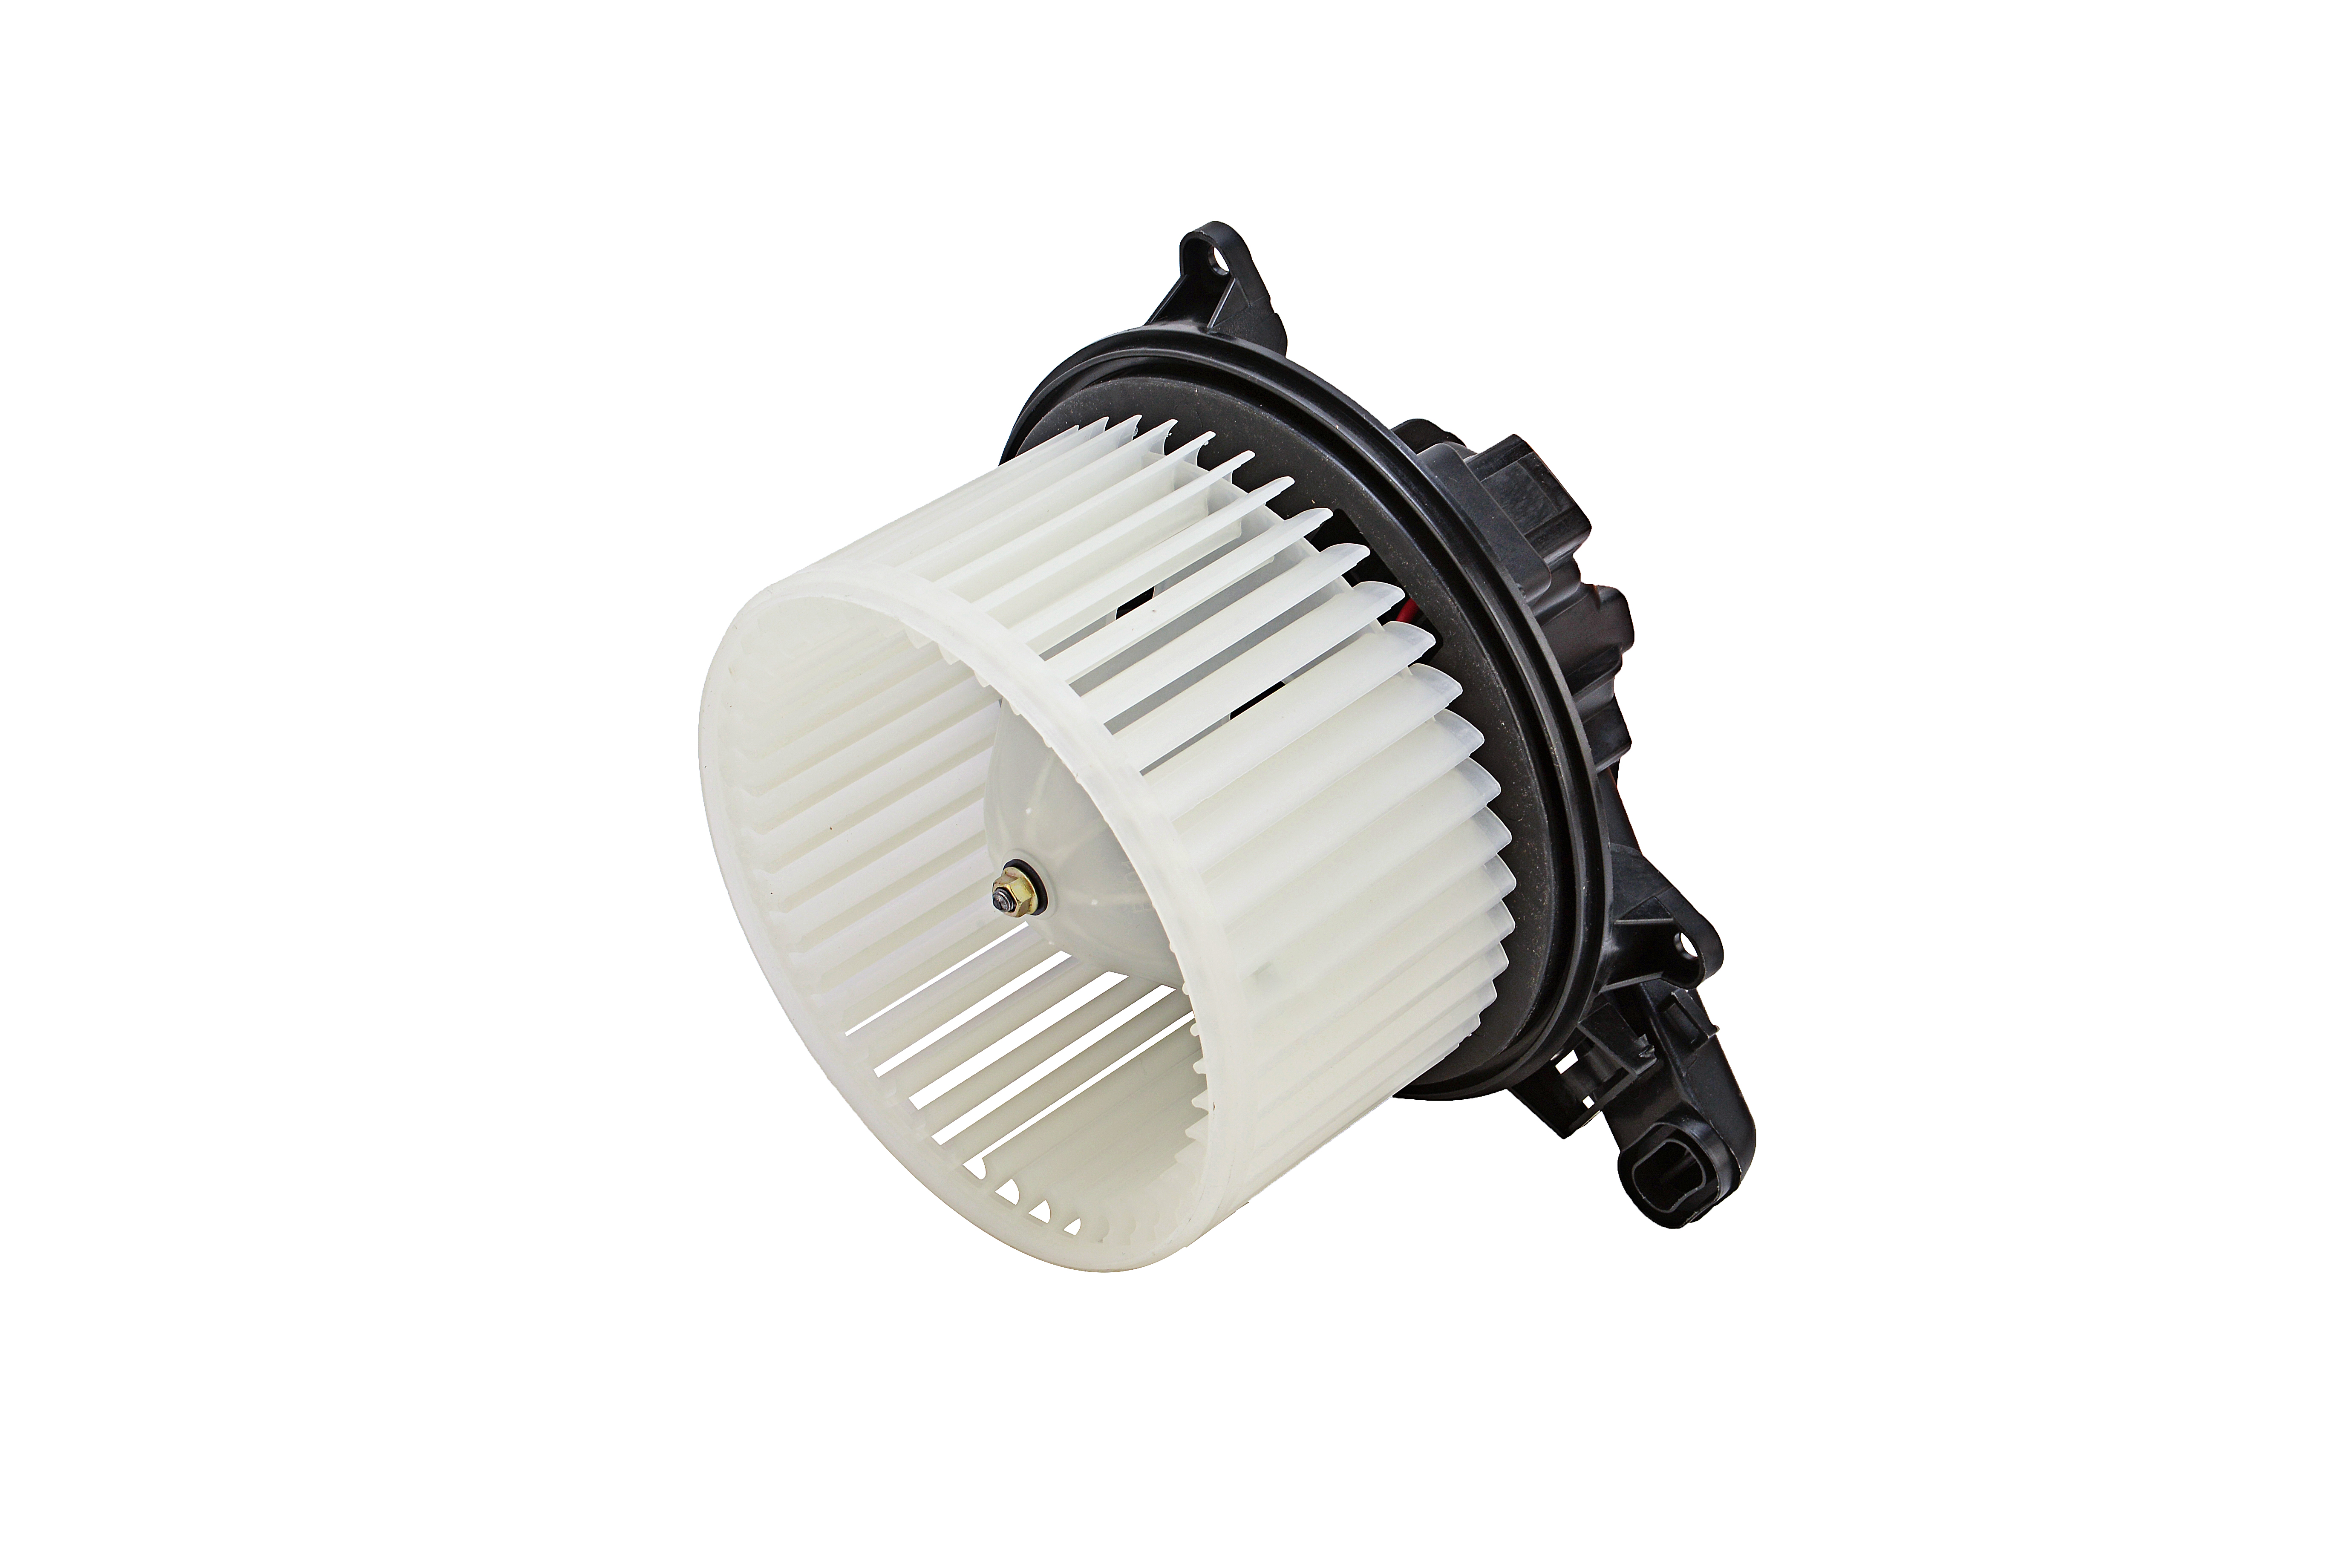 Blower Motor - Fits Ford Expedition, F-150, Lincoln Navigator - Replaces CL1Z19805A Image